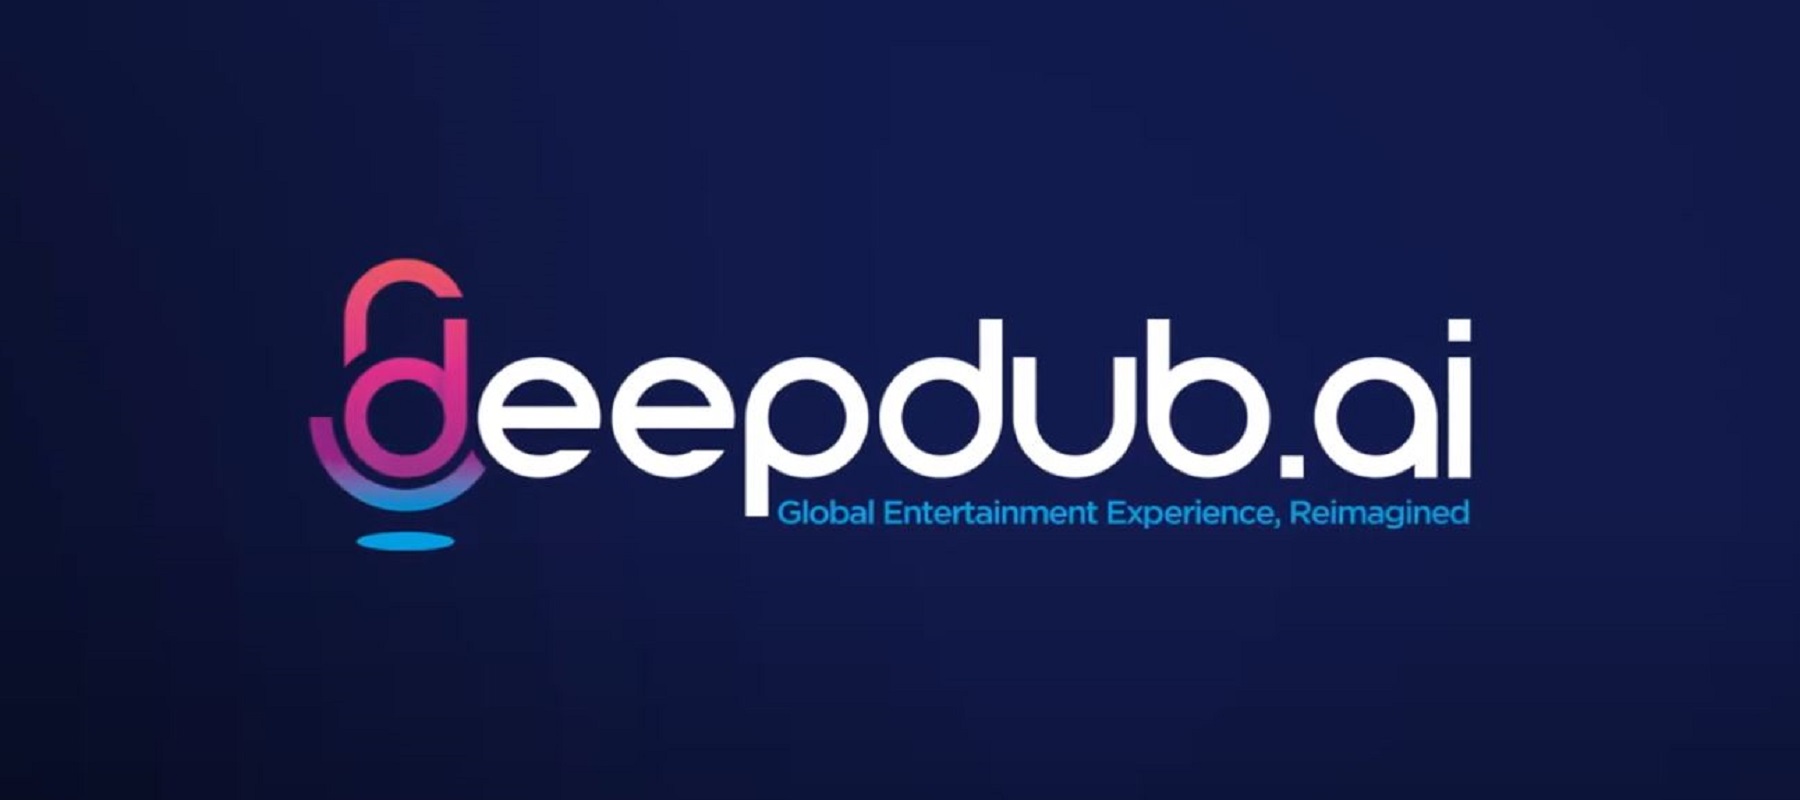 Deepdub and OOONA collaborate to expand AI-based dubbing solutions to entertainment and media clients